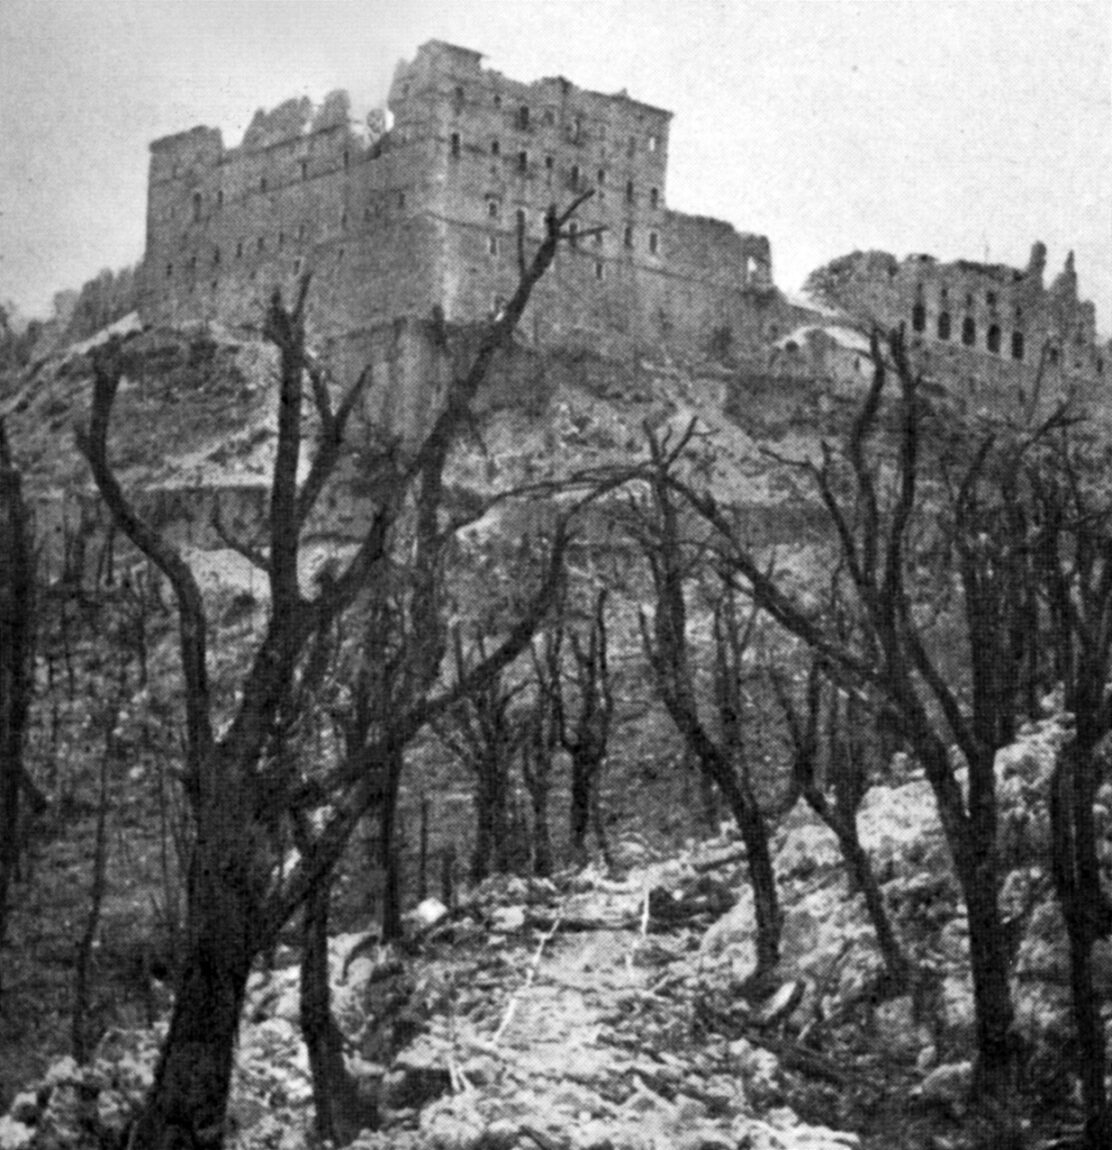 Anders adjusted tactics after the first assault on Monte Cassino so that the artillery would continue supporting Polish infantry until the objective was taken before switching to another target.